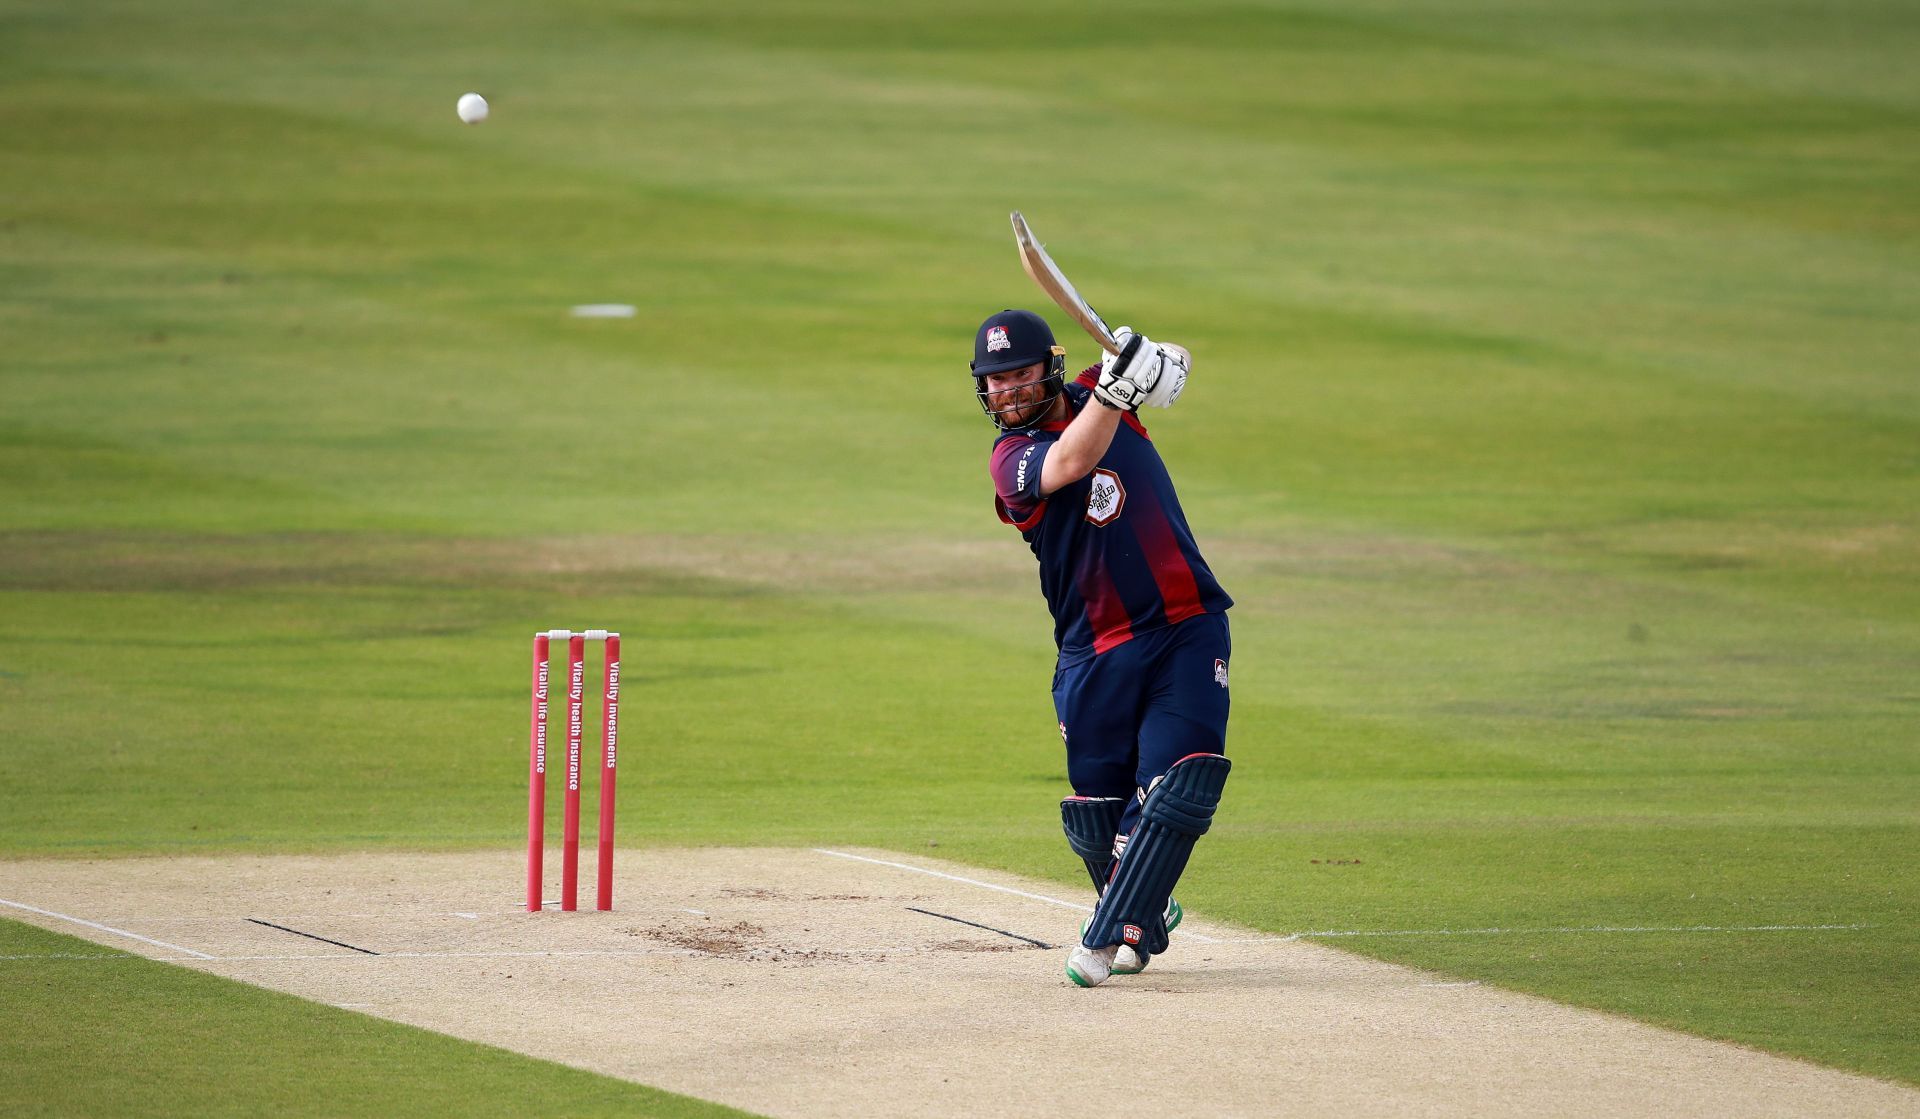 Paul Stirling could have been a good choice for KKR instead of Aaron Finch (Getty Images)